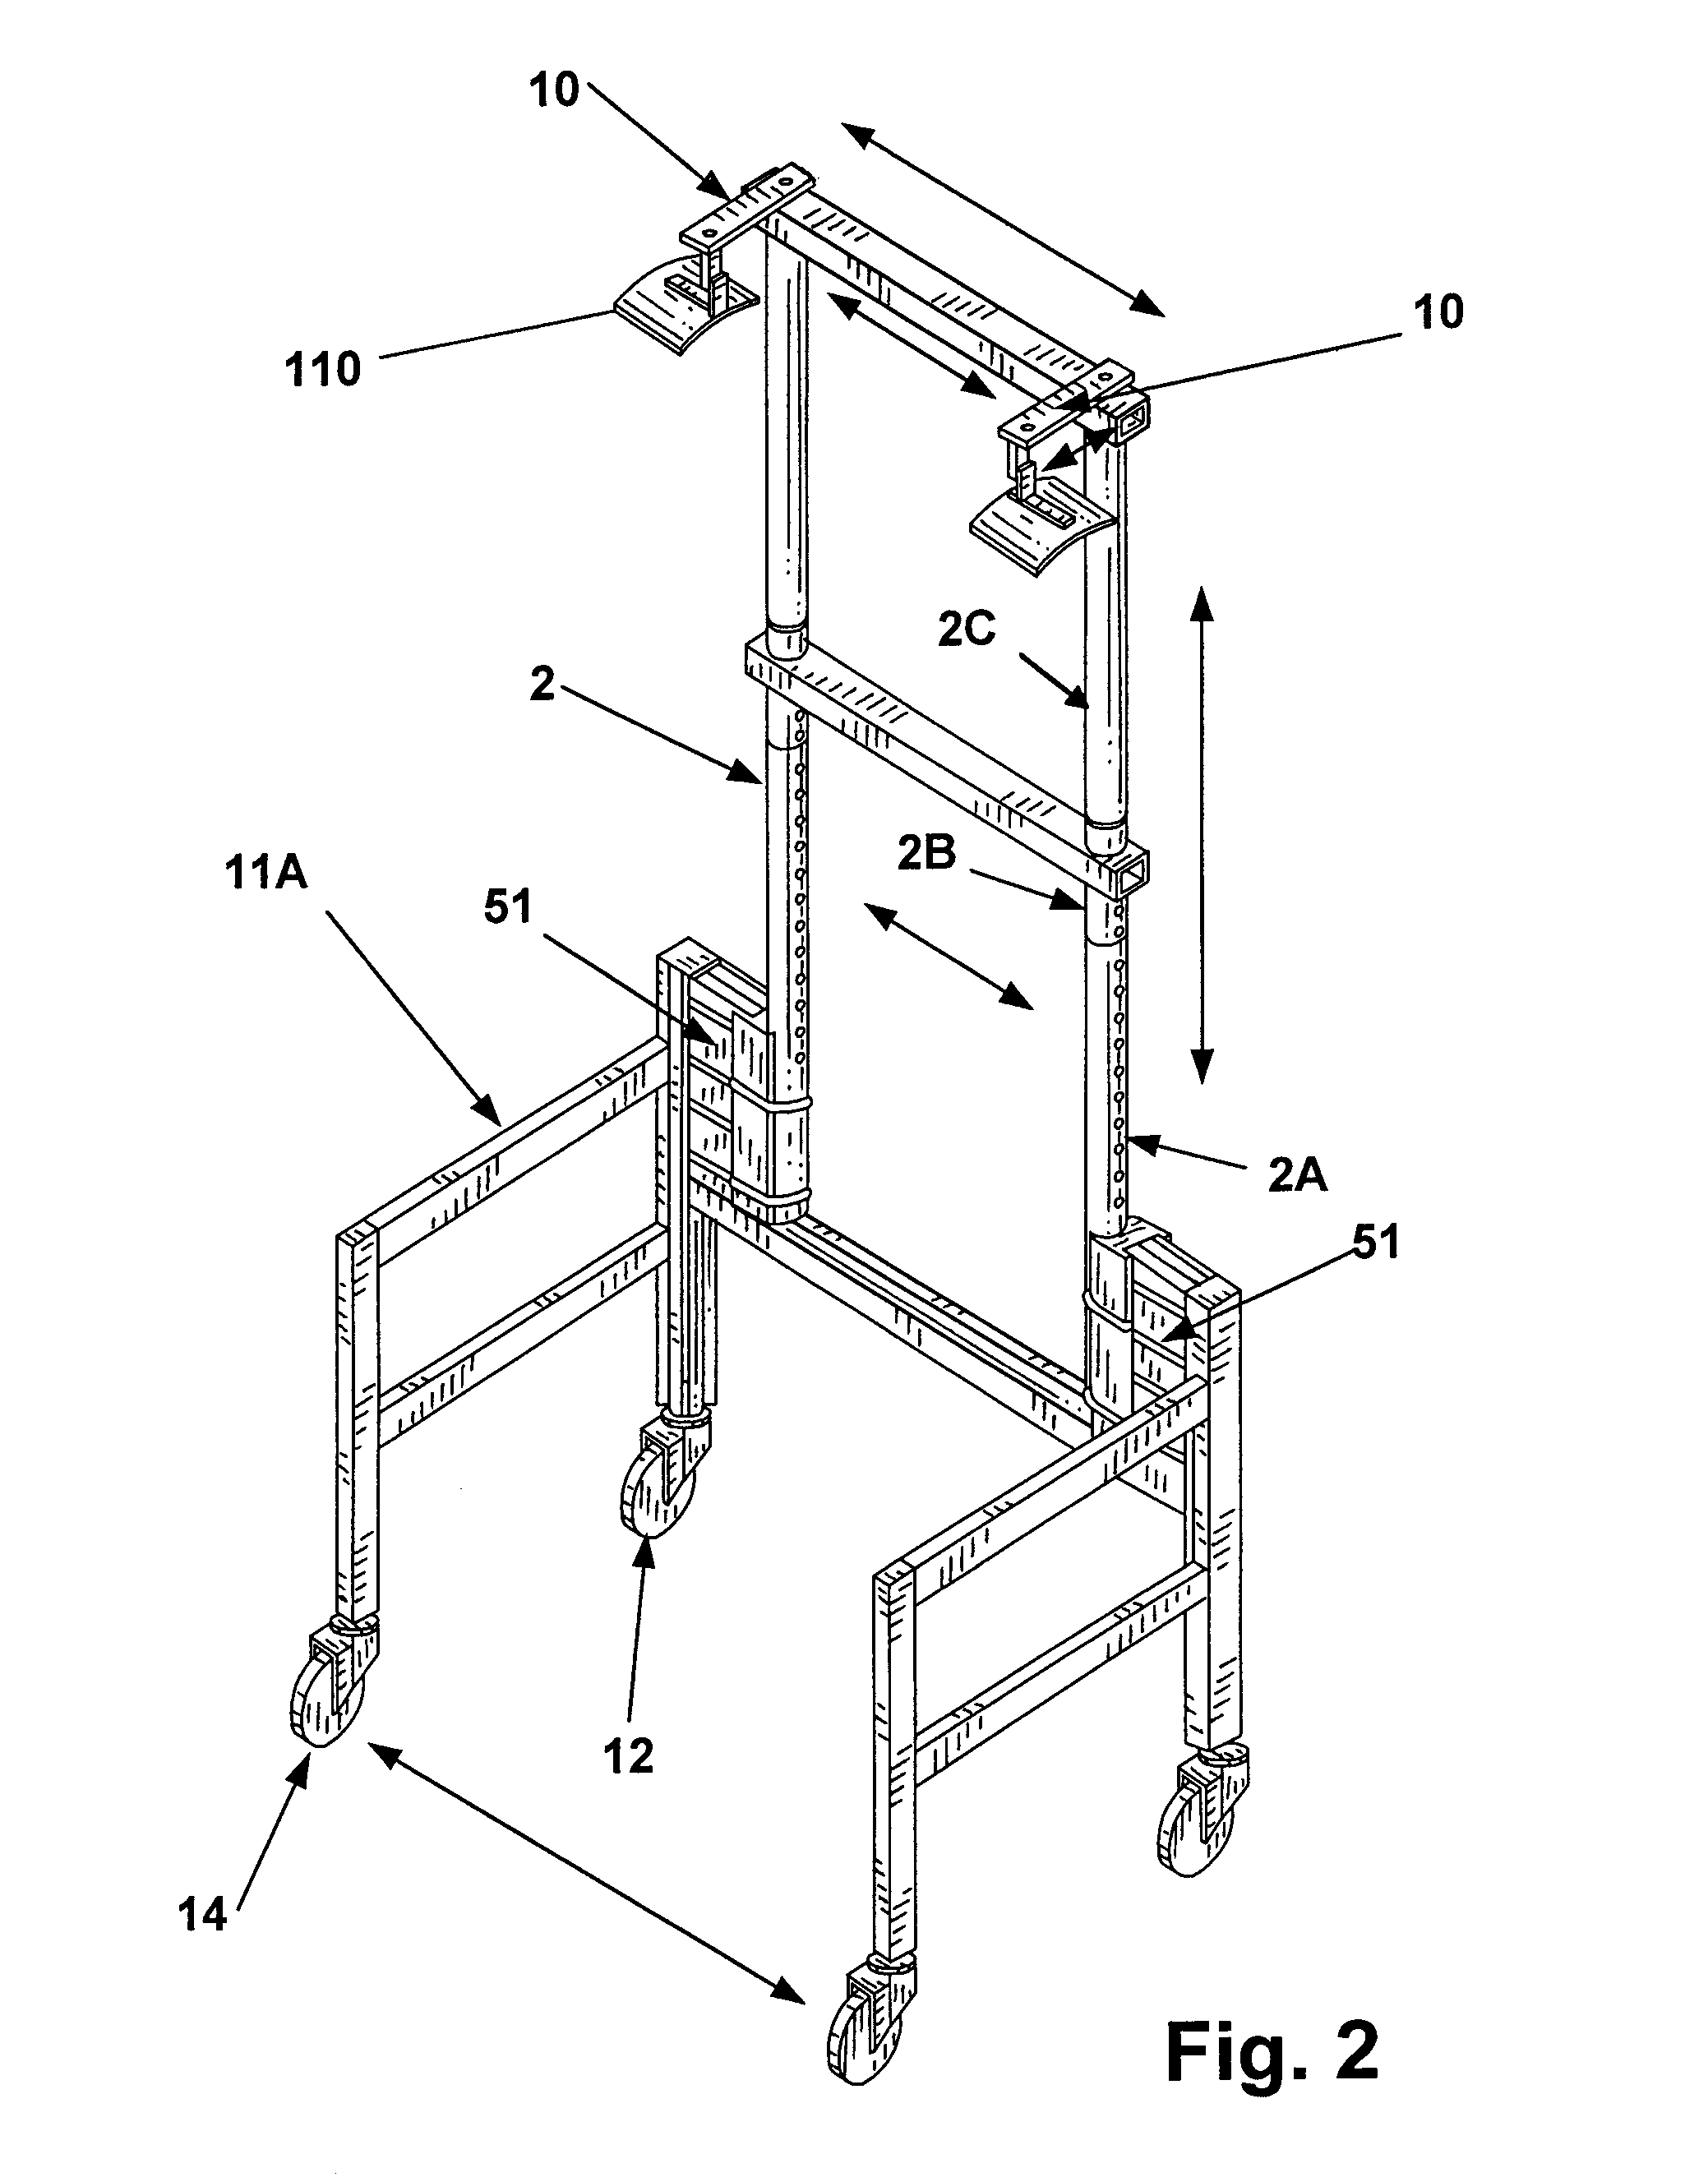 Practical design for a walk-around, hands-free radiation protective shielding garment suspension apparatus